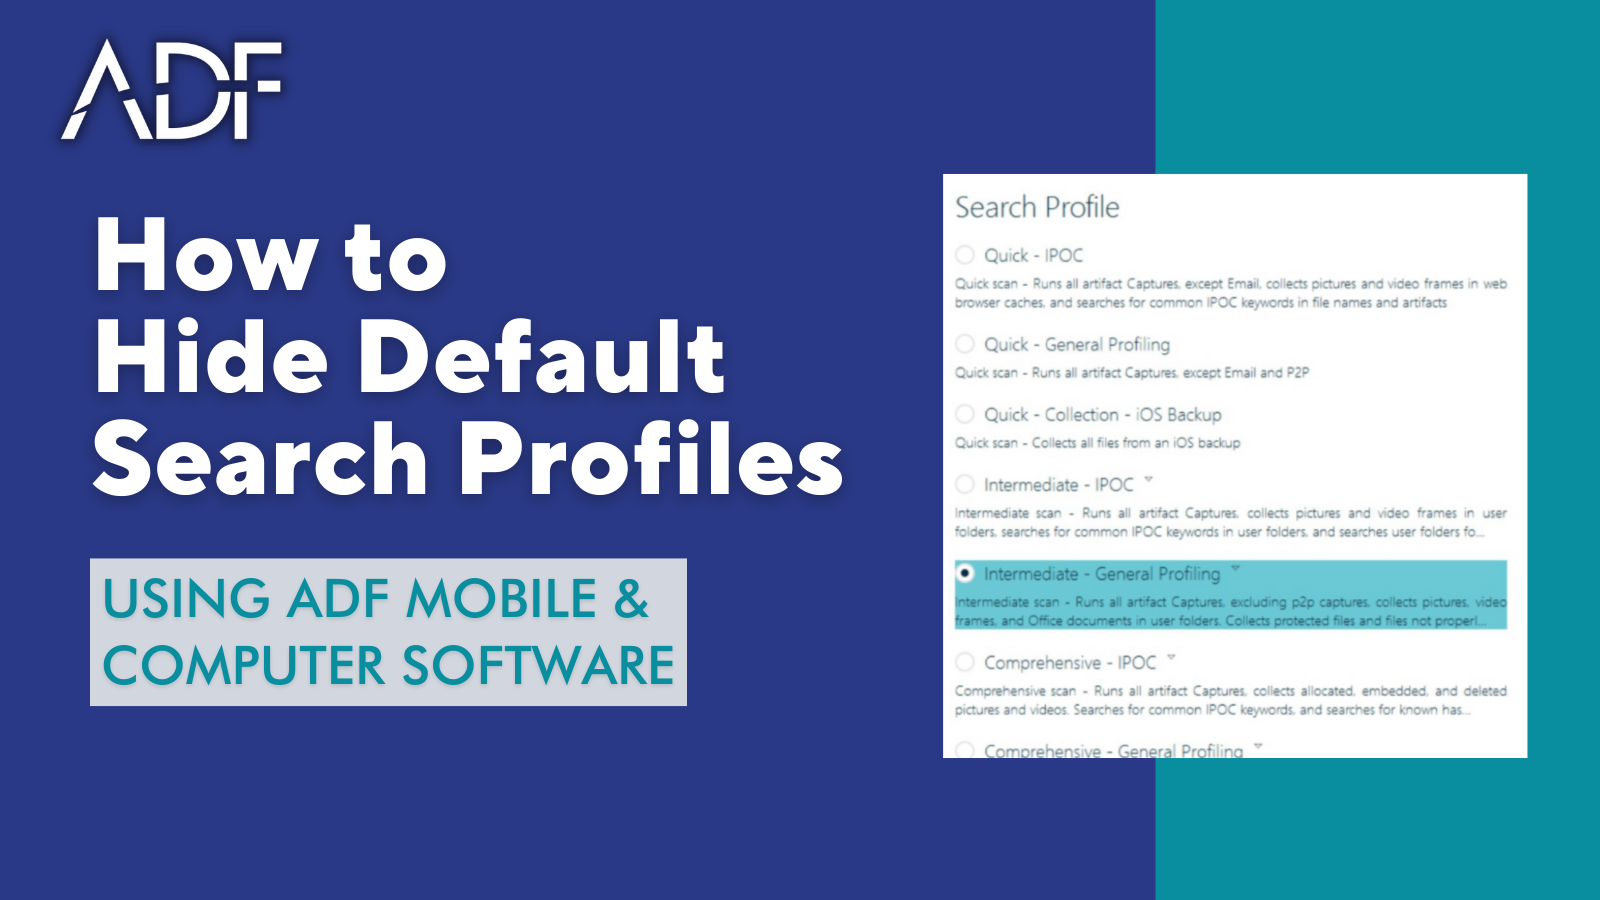 How to Hide Default Search Profiles in ADF Digital Forensic Software